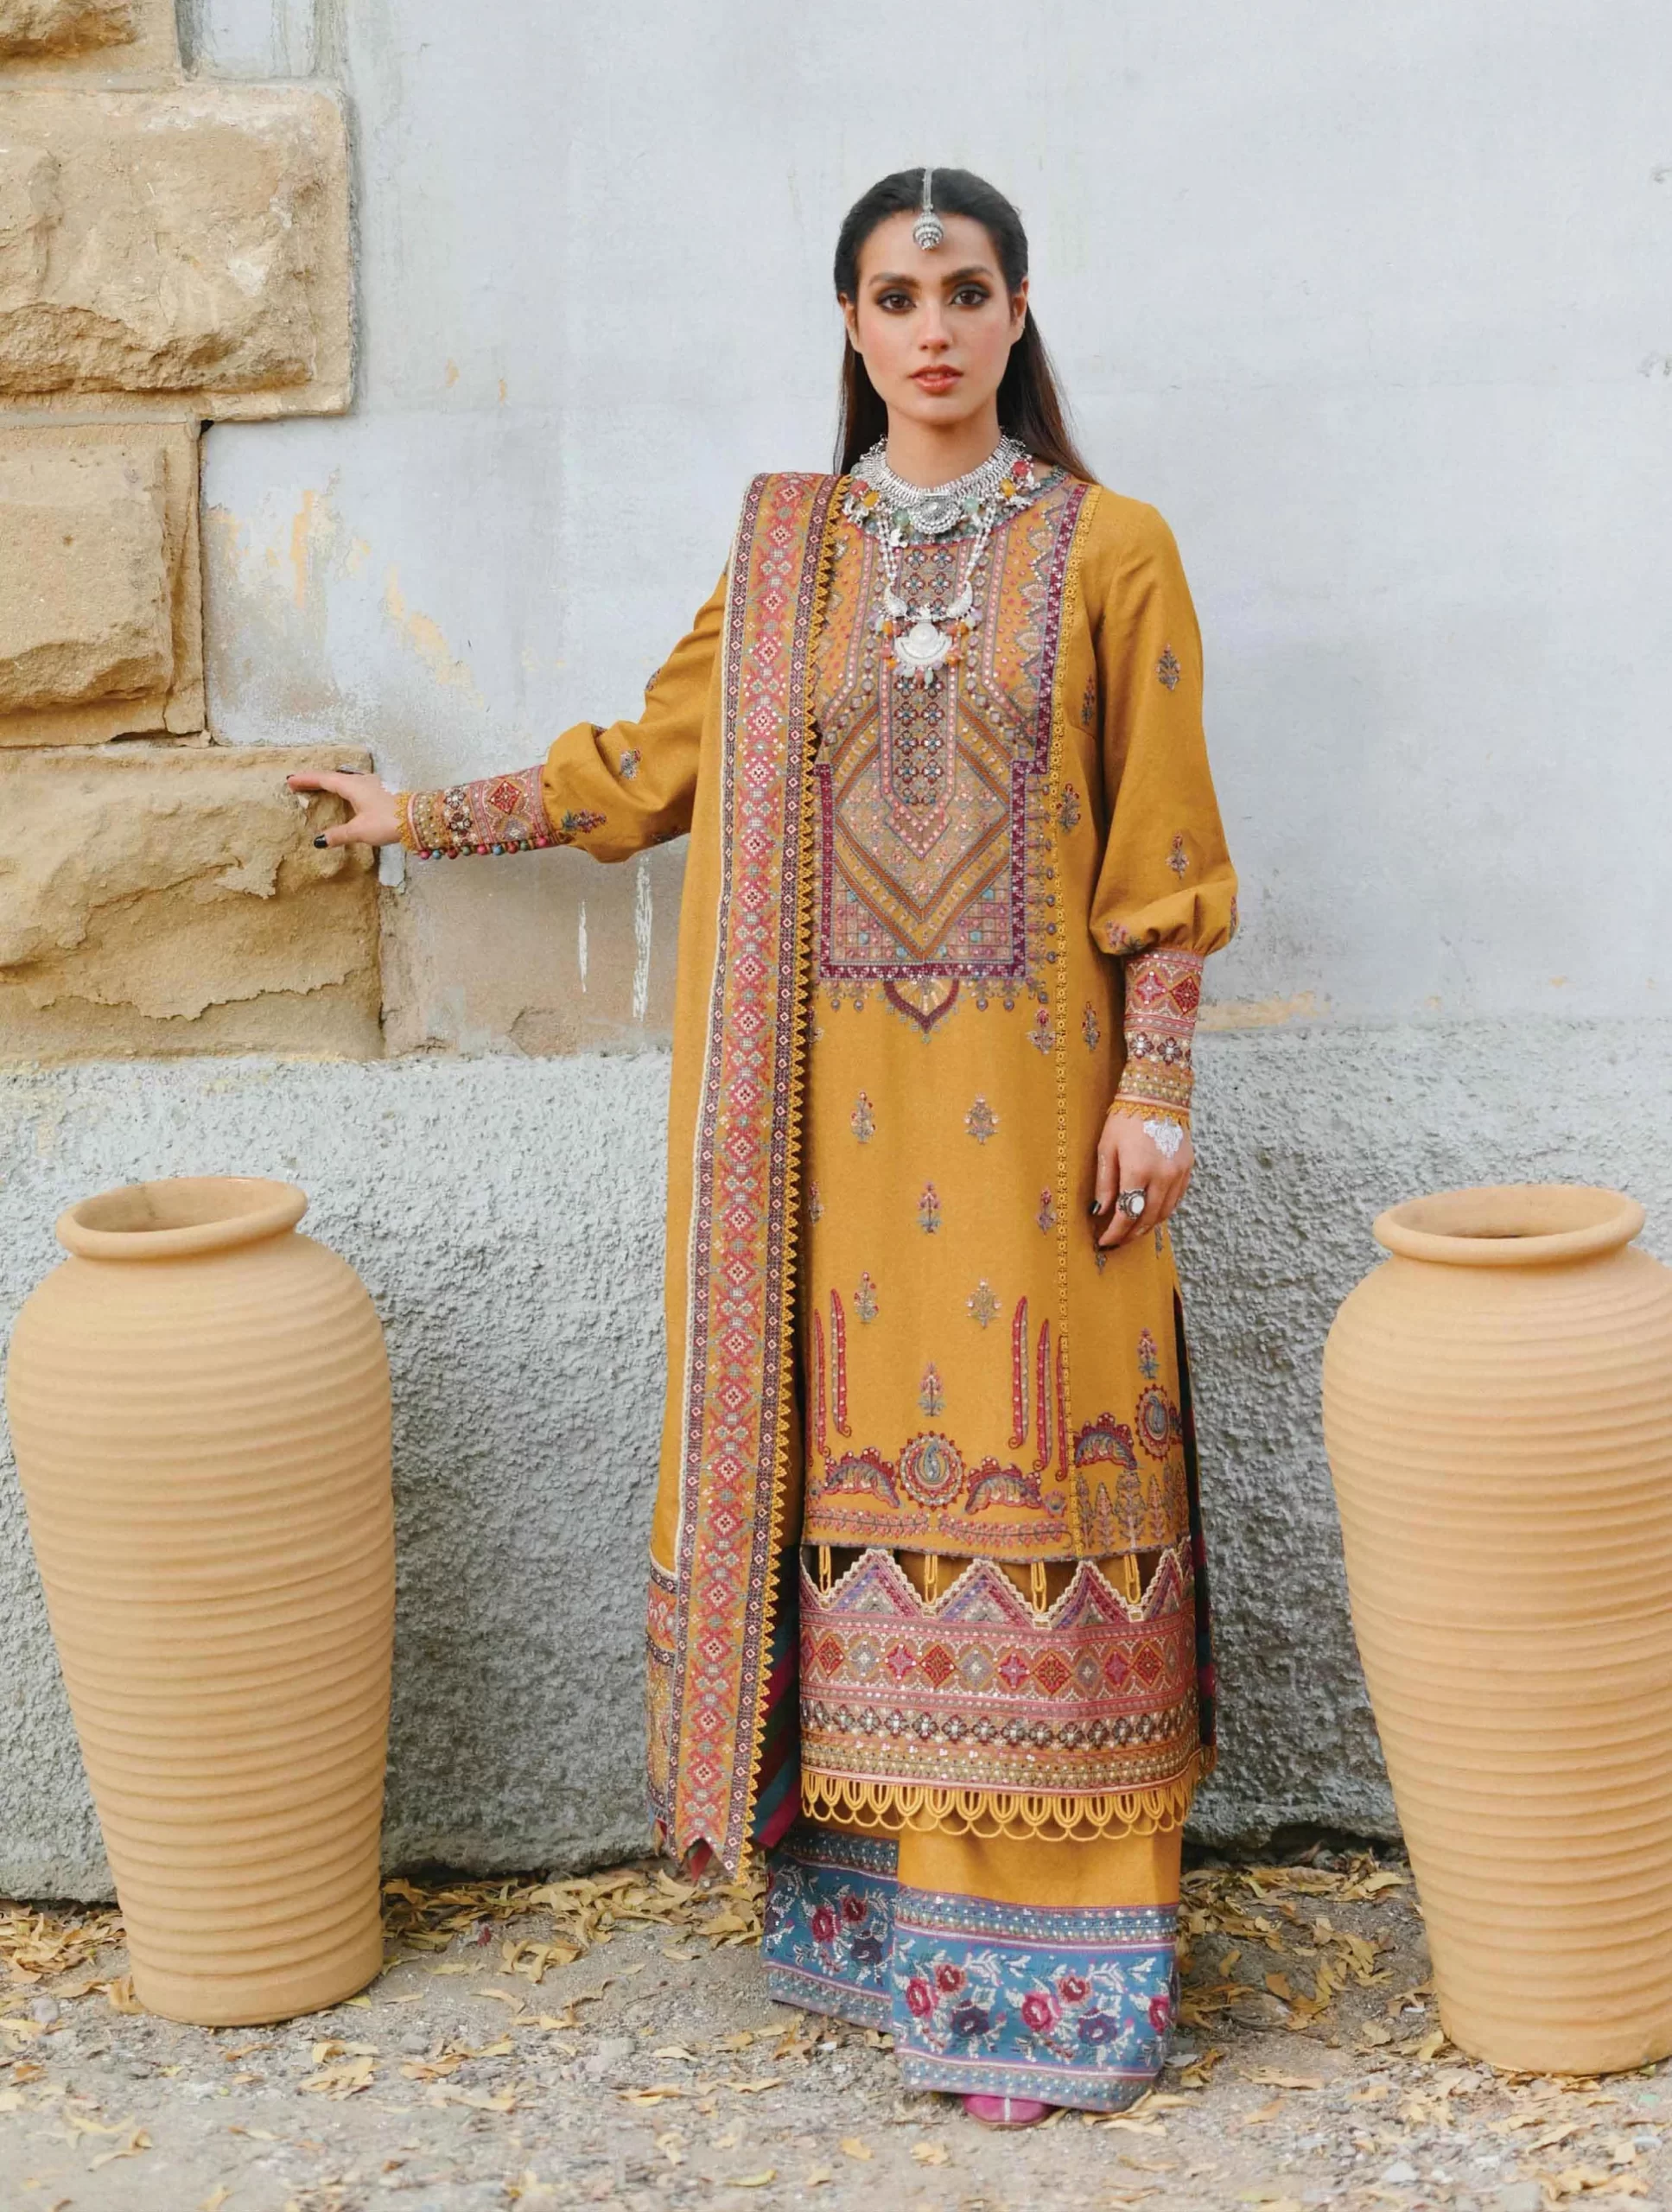 mehreen collection in lahore